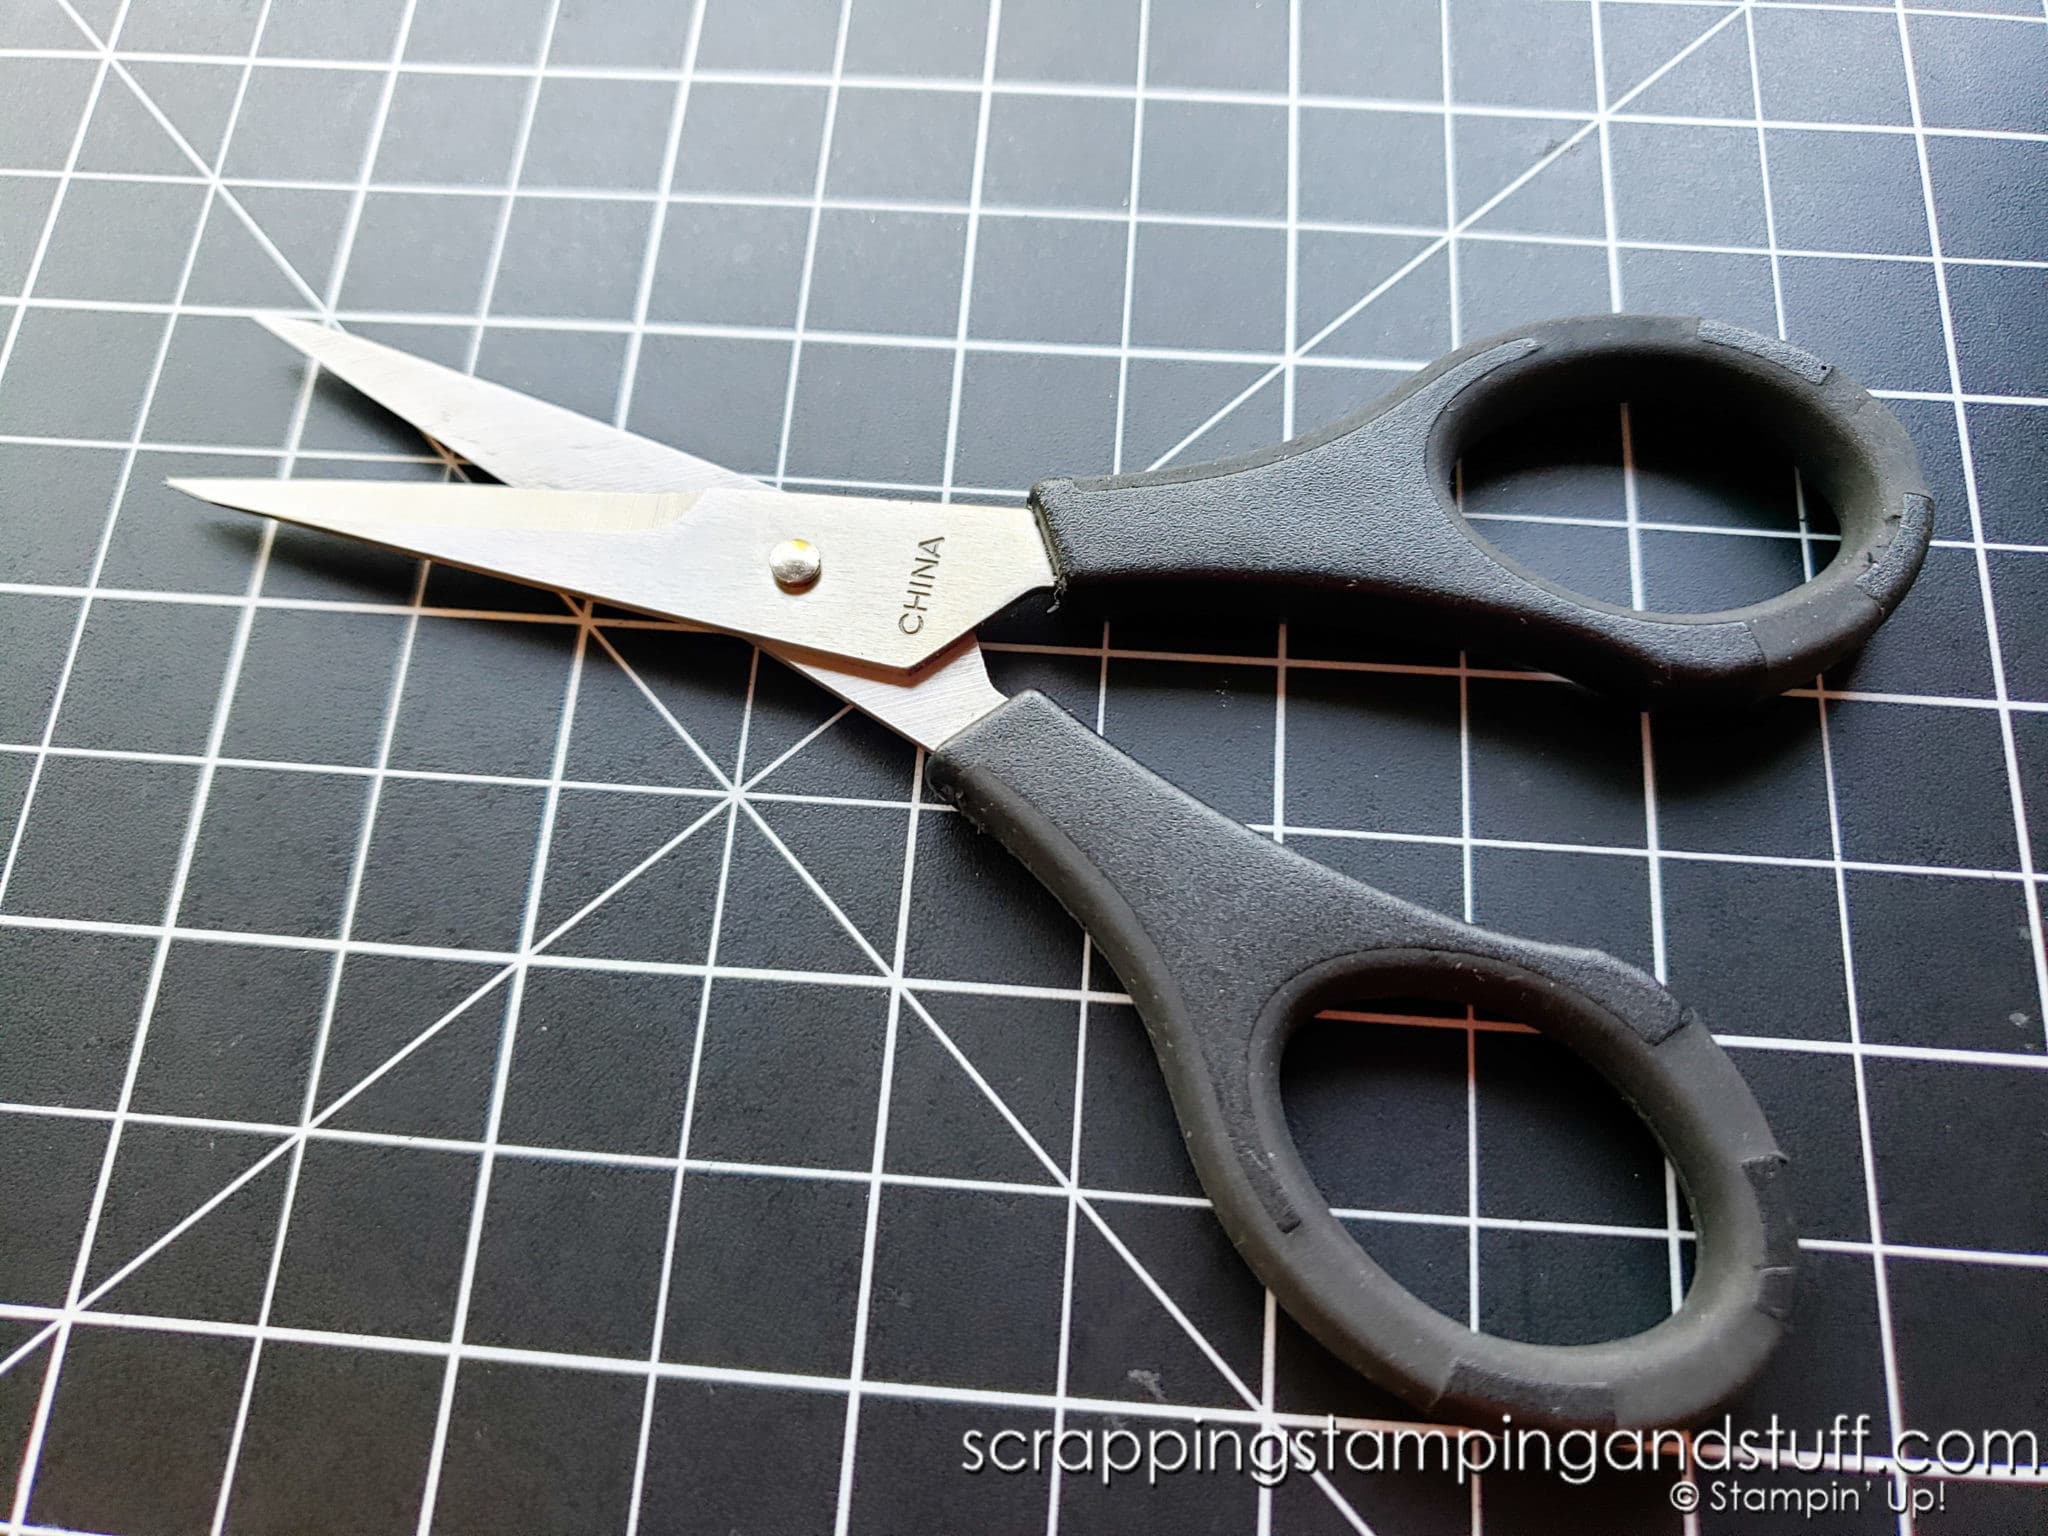 High Quality Paper Cutting Scissors For Cardmaking and Paper Crafting